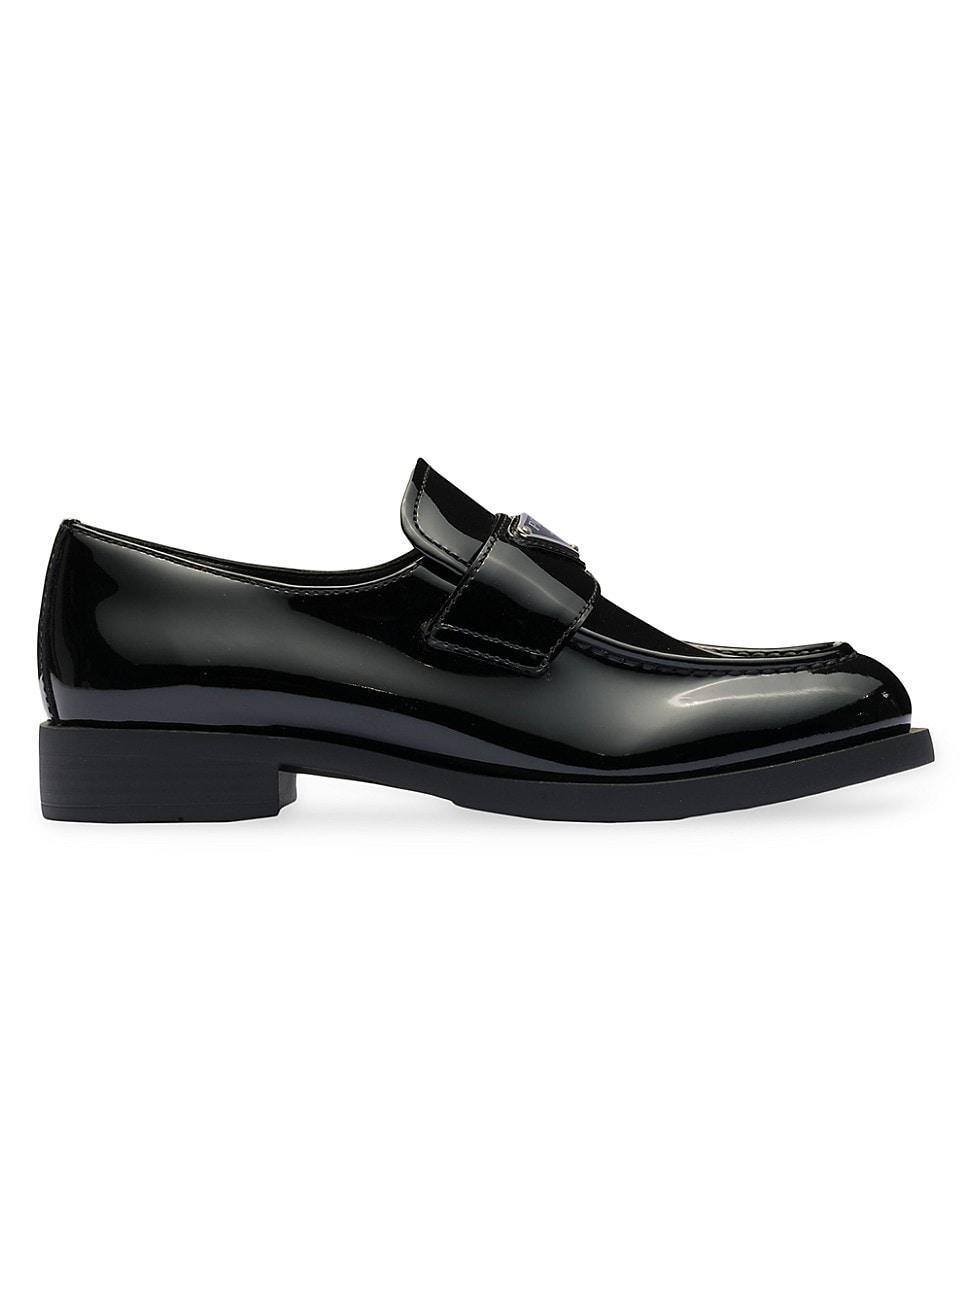 Womens Patent Leather Loafers Product Image